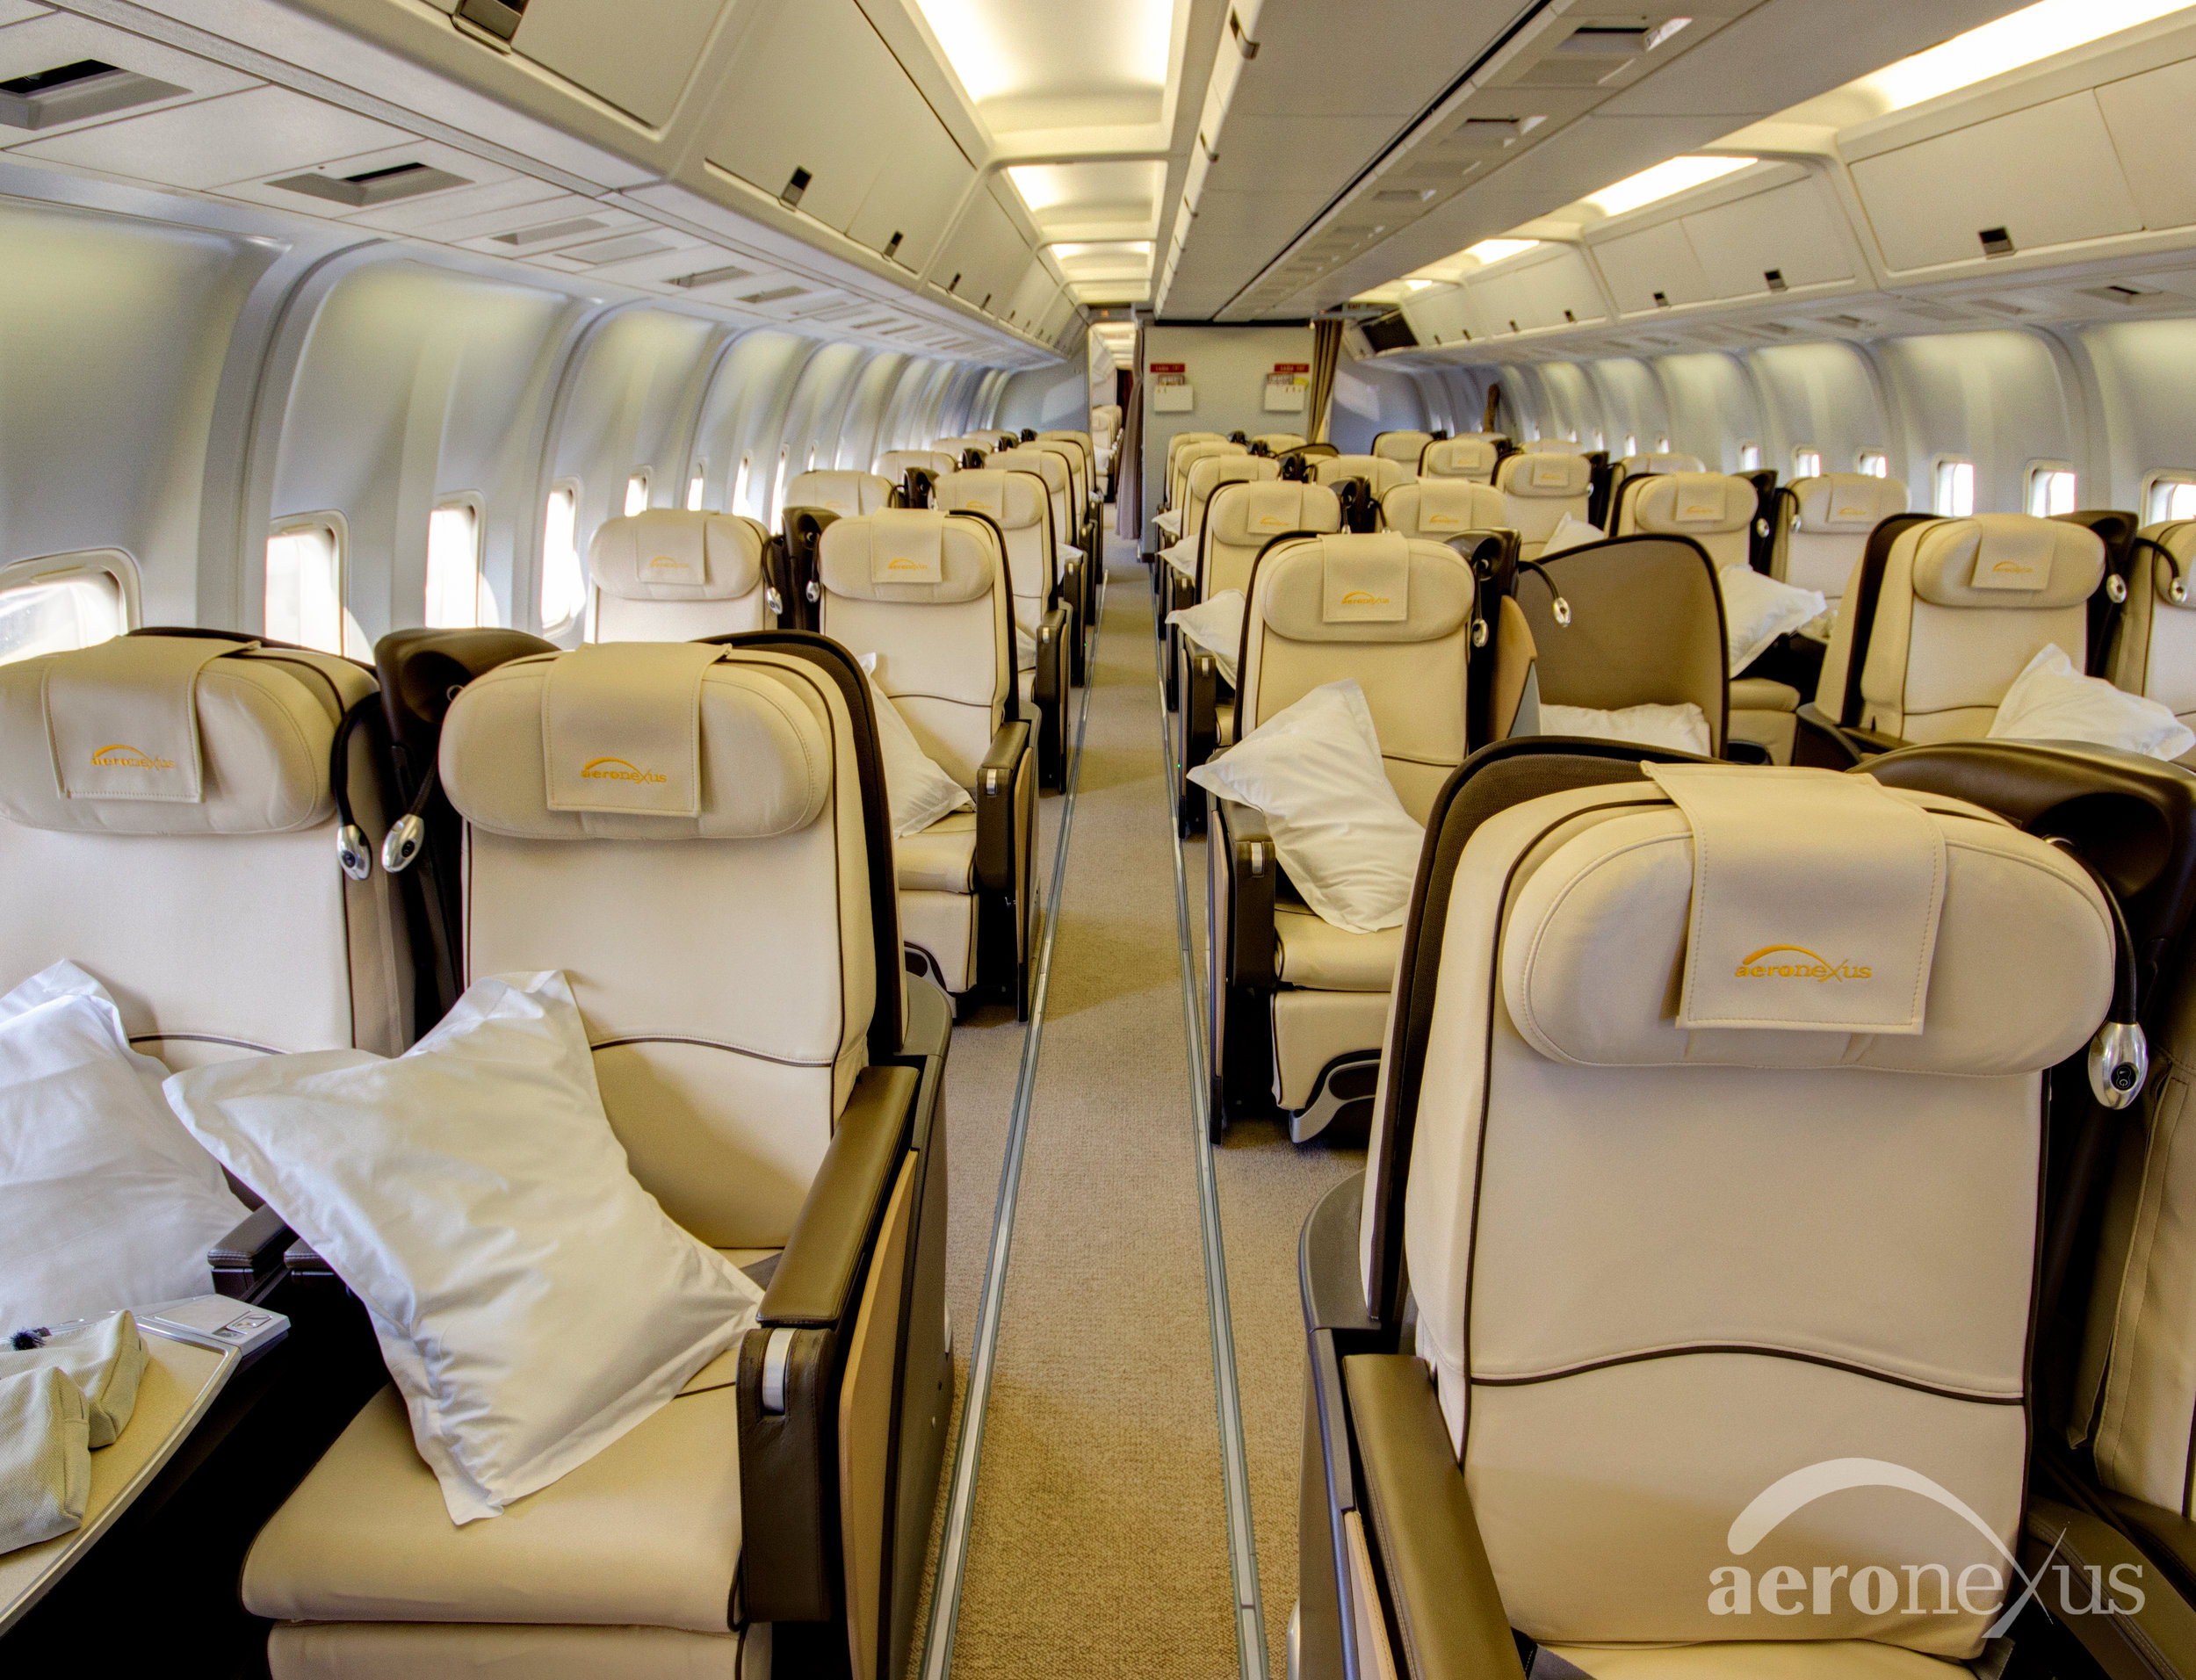 Boeing 767 interior Free Photo Download | FreeImages